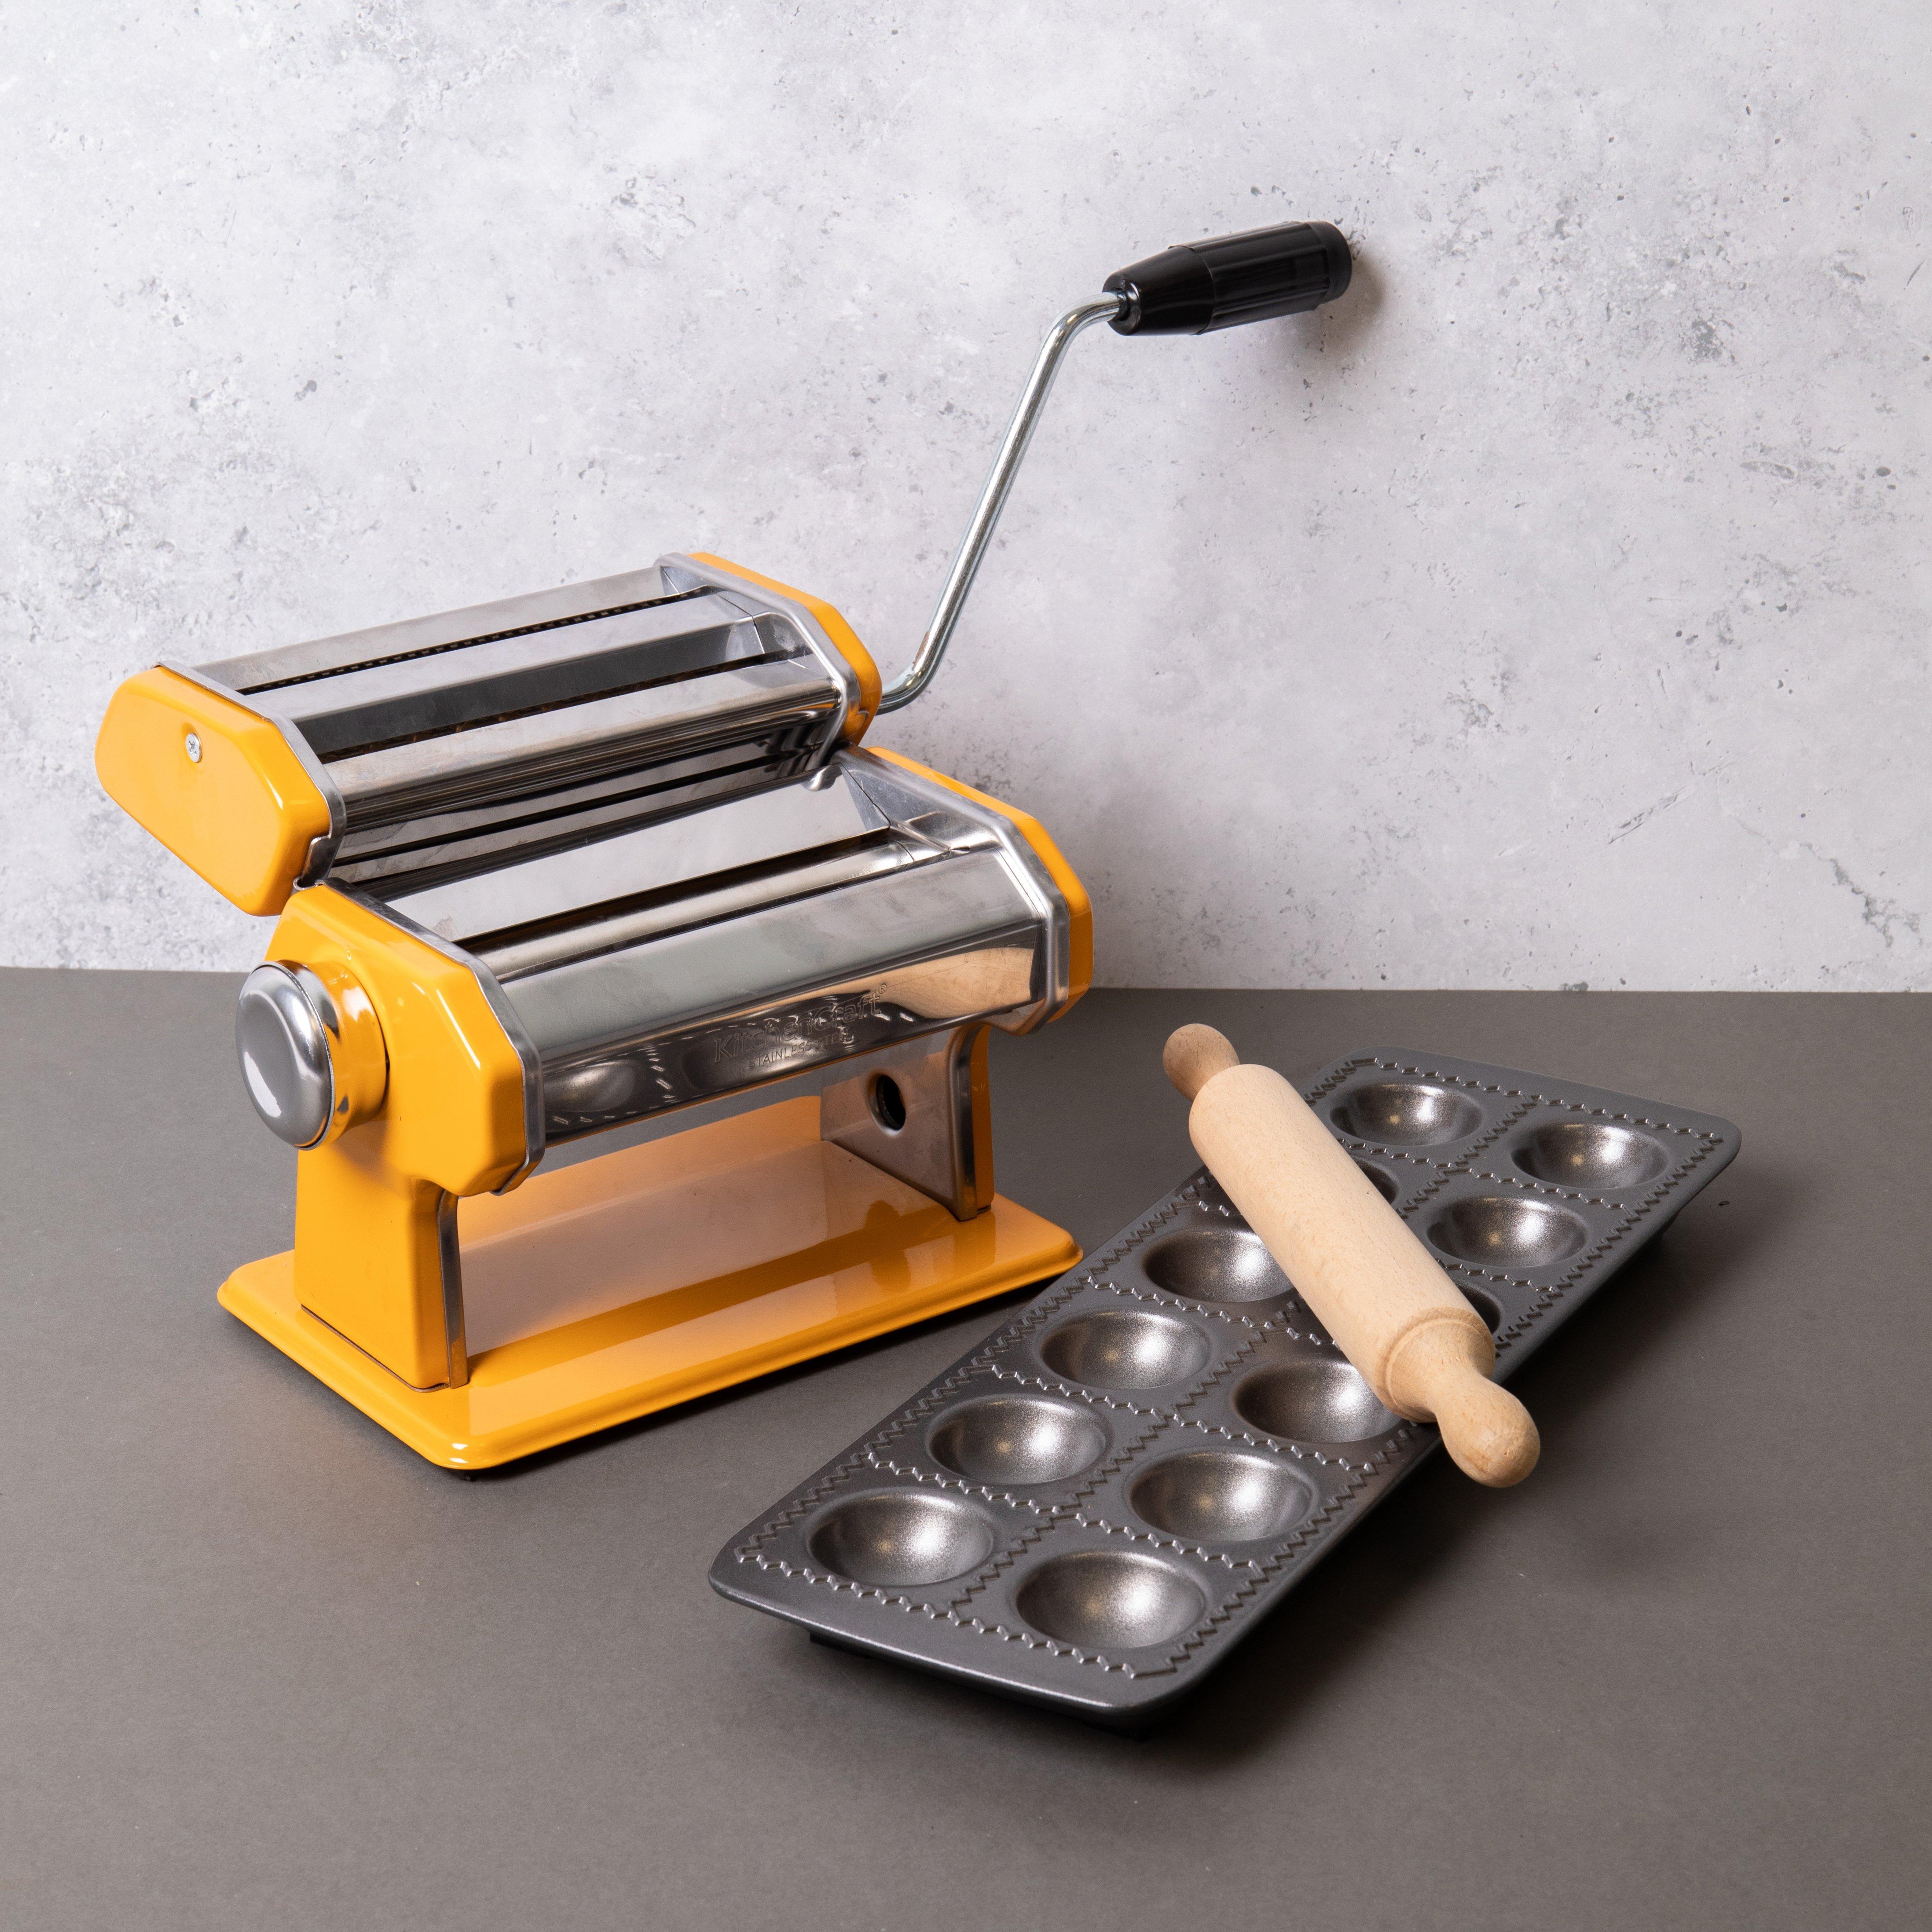 Pasta Making Set with Yellow Stainless Steel Pasta Maker, Non-Stick Ravioli Mould and Rolling Pin